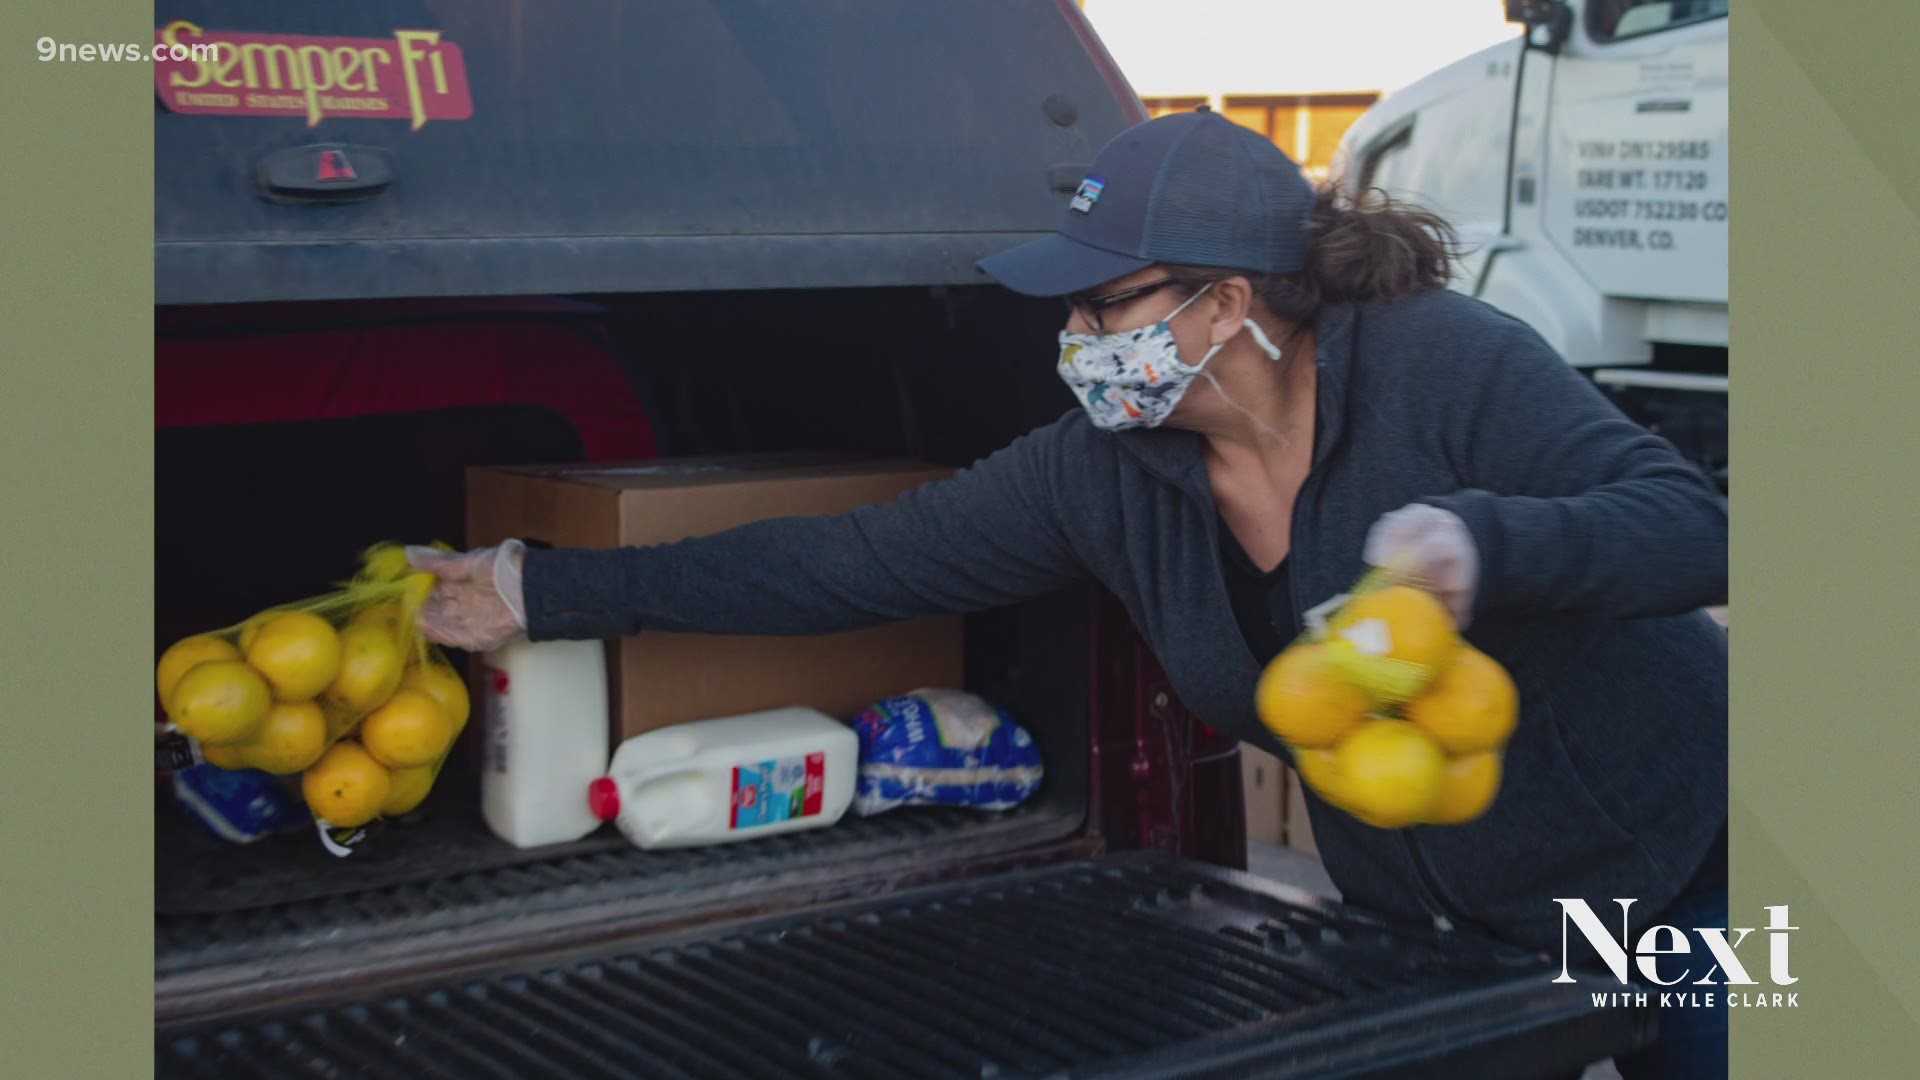 Staff locate pockets of need and then get fresh food items like produce to Coloradans who need them.